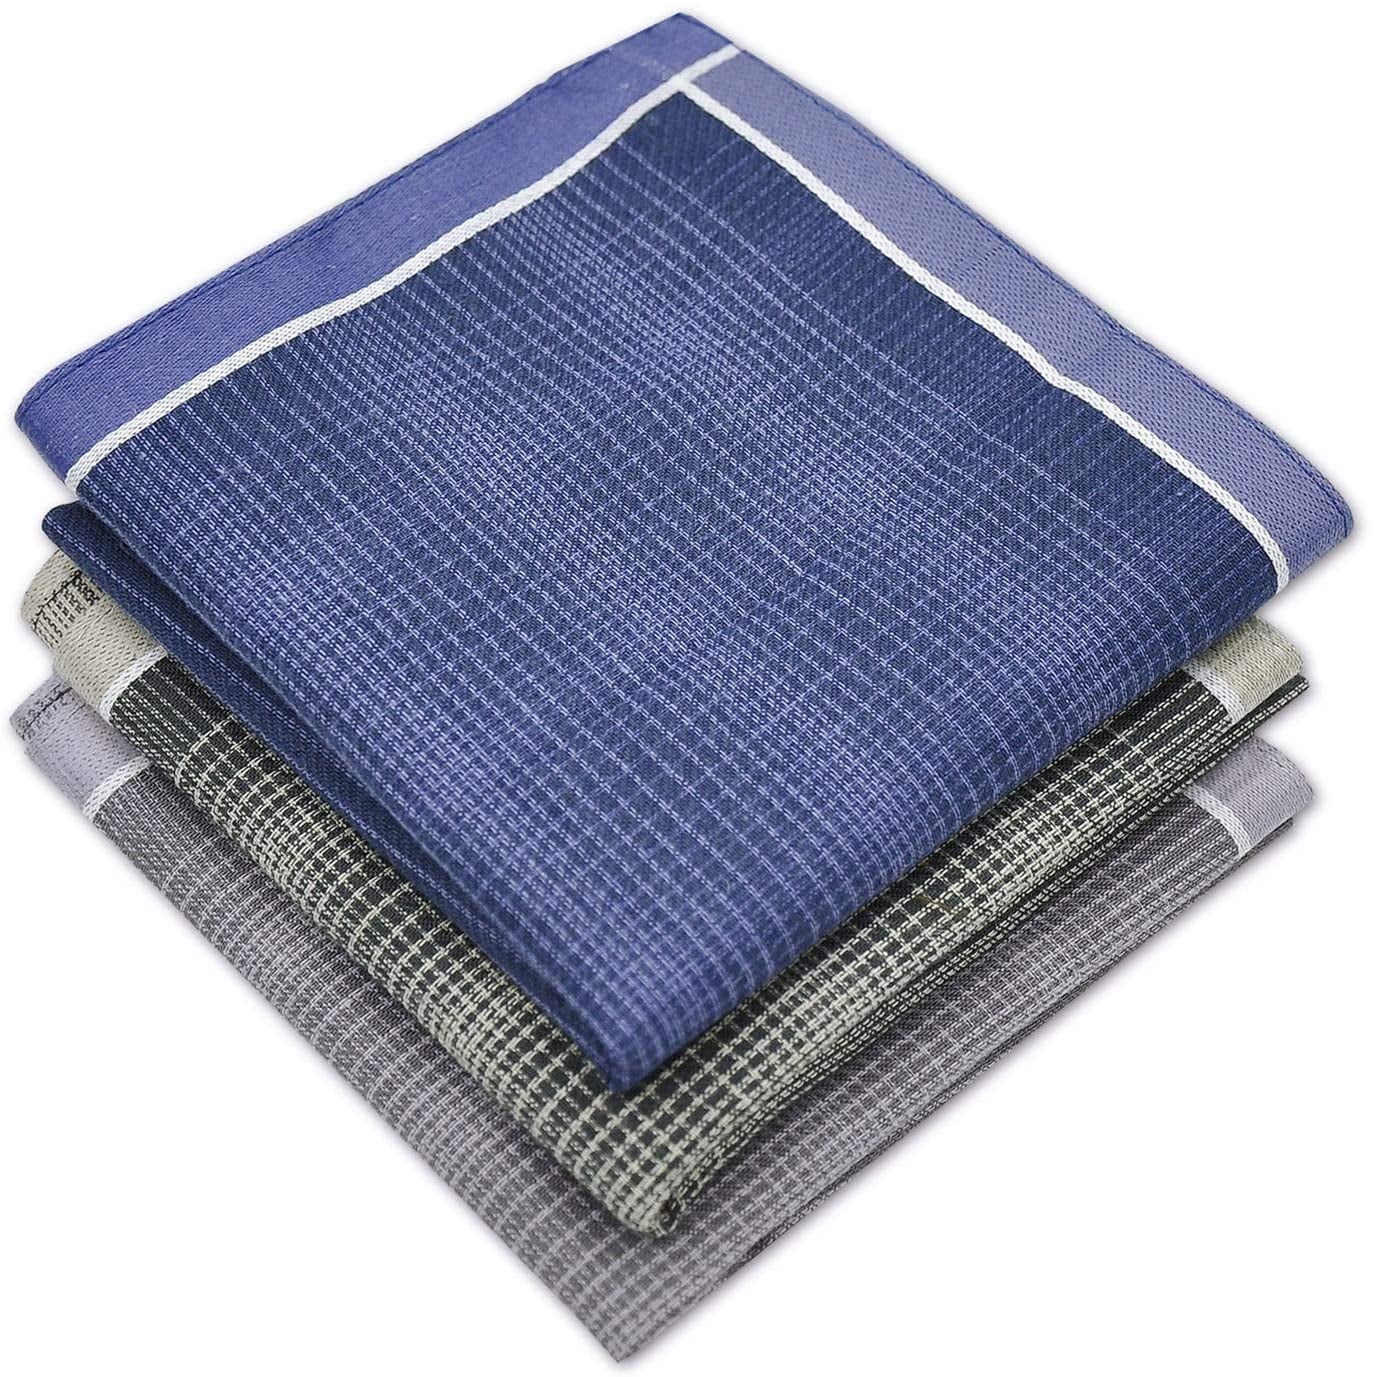 12 or 6 MEN,s 100%COTTON HANDKERCHIEFS HANKIES Quality Gift pack-size 15"x15"new 